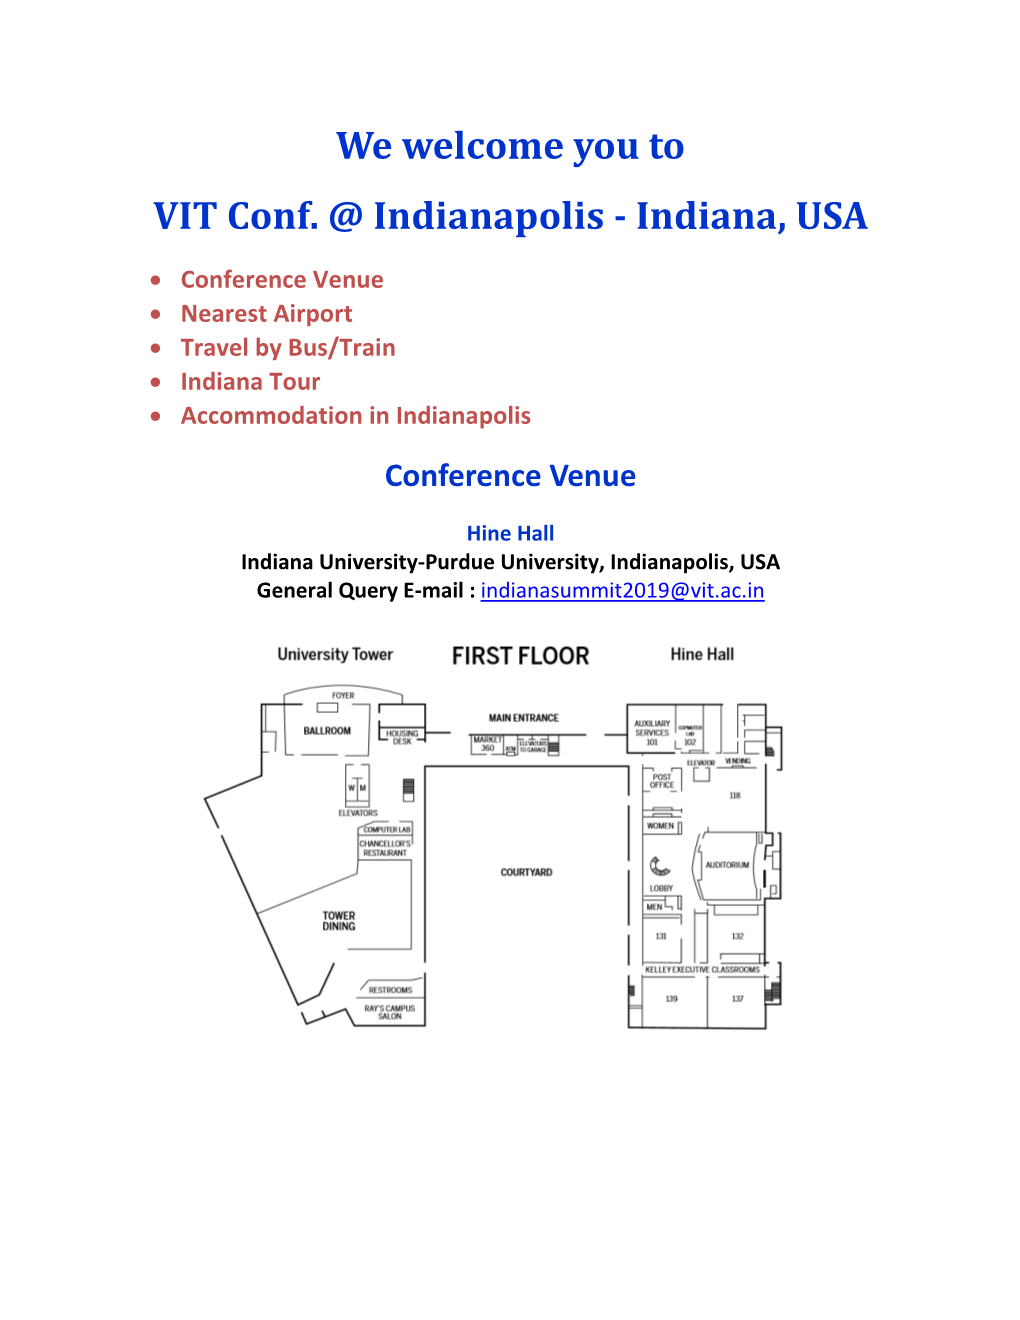 We Welcome You to VIT Conf. @ Indianapolis - Indiana, USA